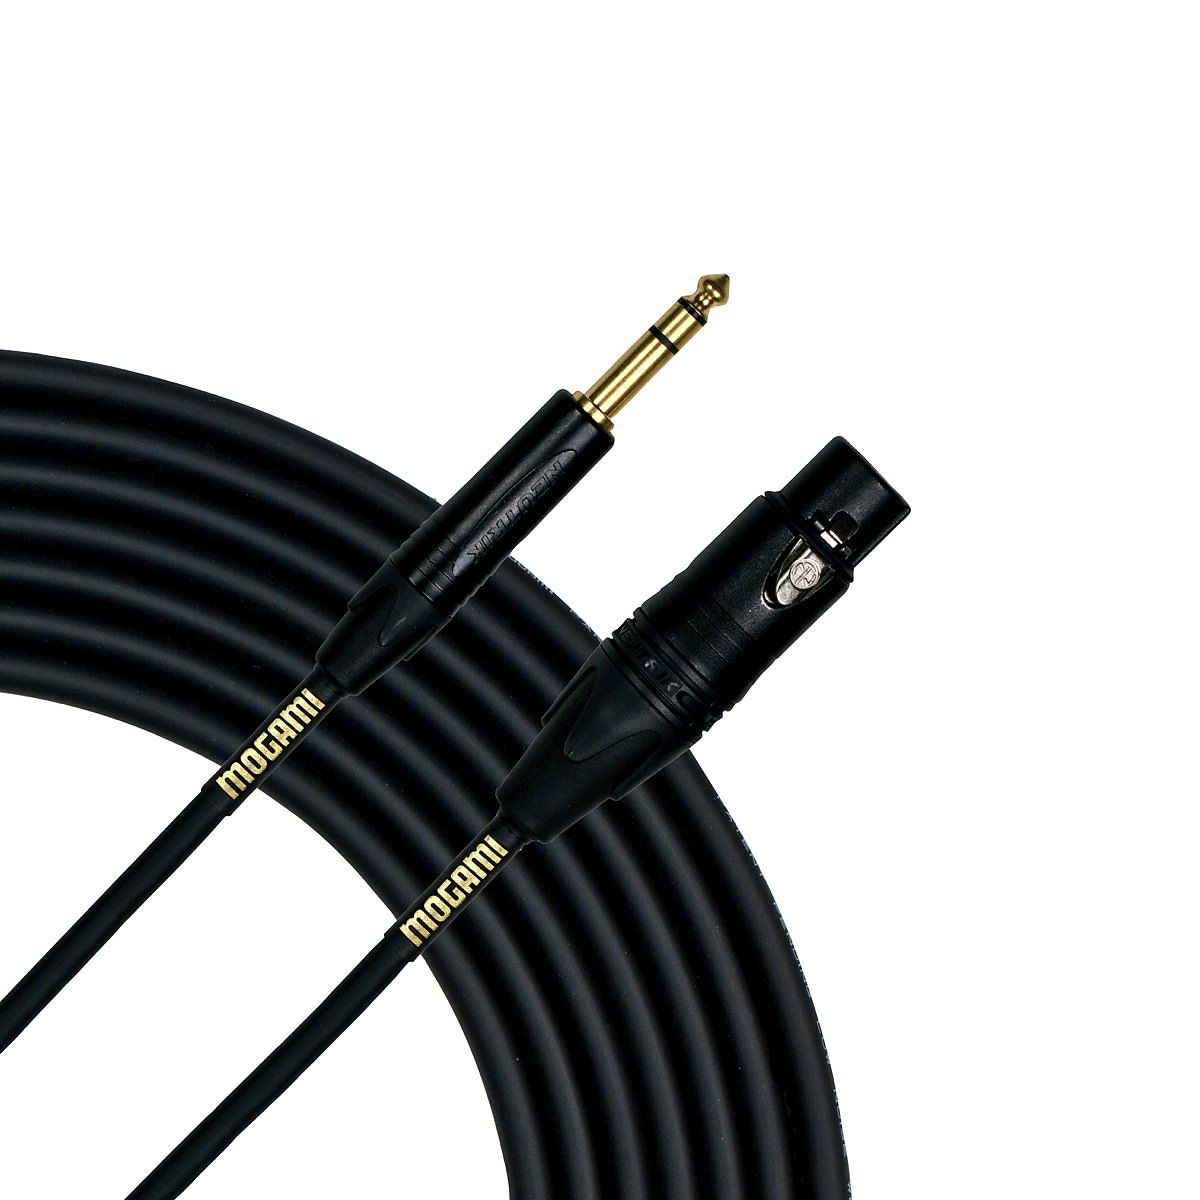 Mogami Gold 1/4 Inch TRS to XLR Female Cable, TRSXLRF-06, 6 Foot